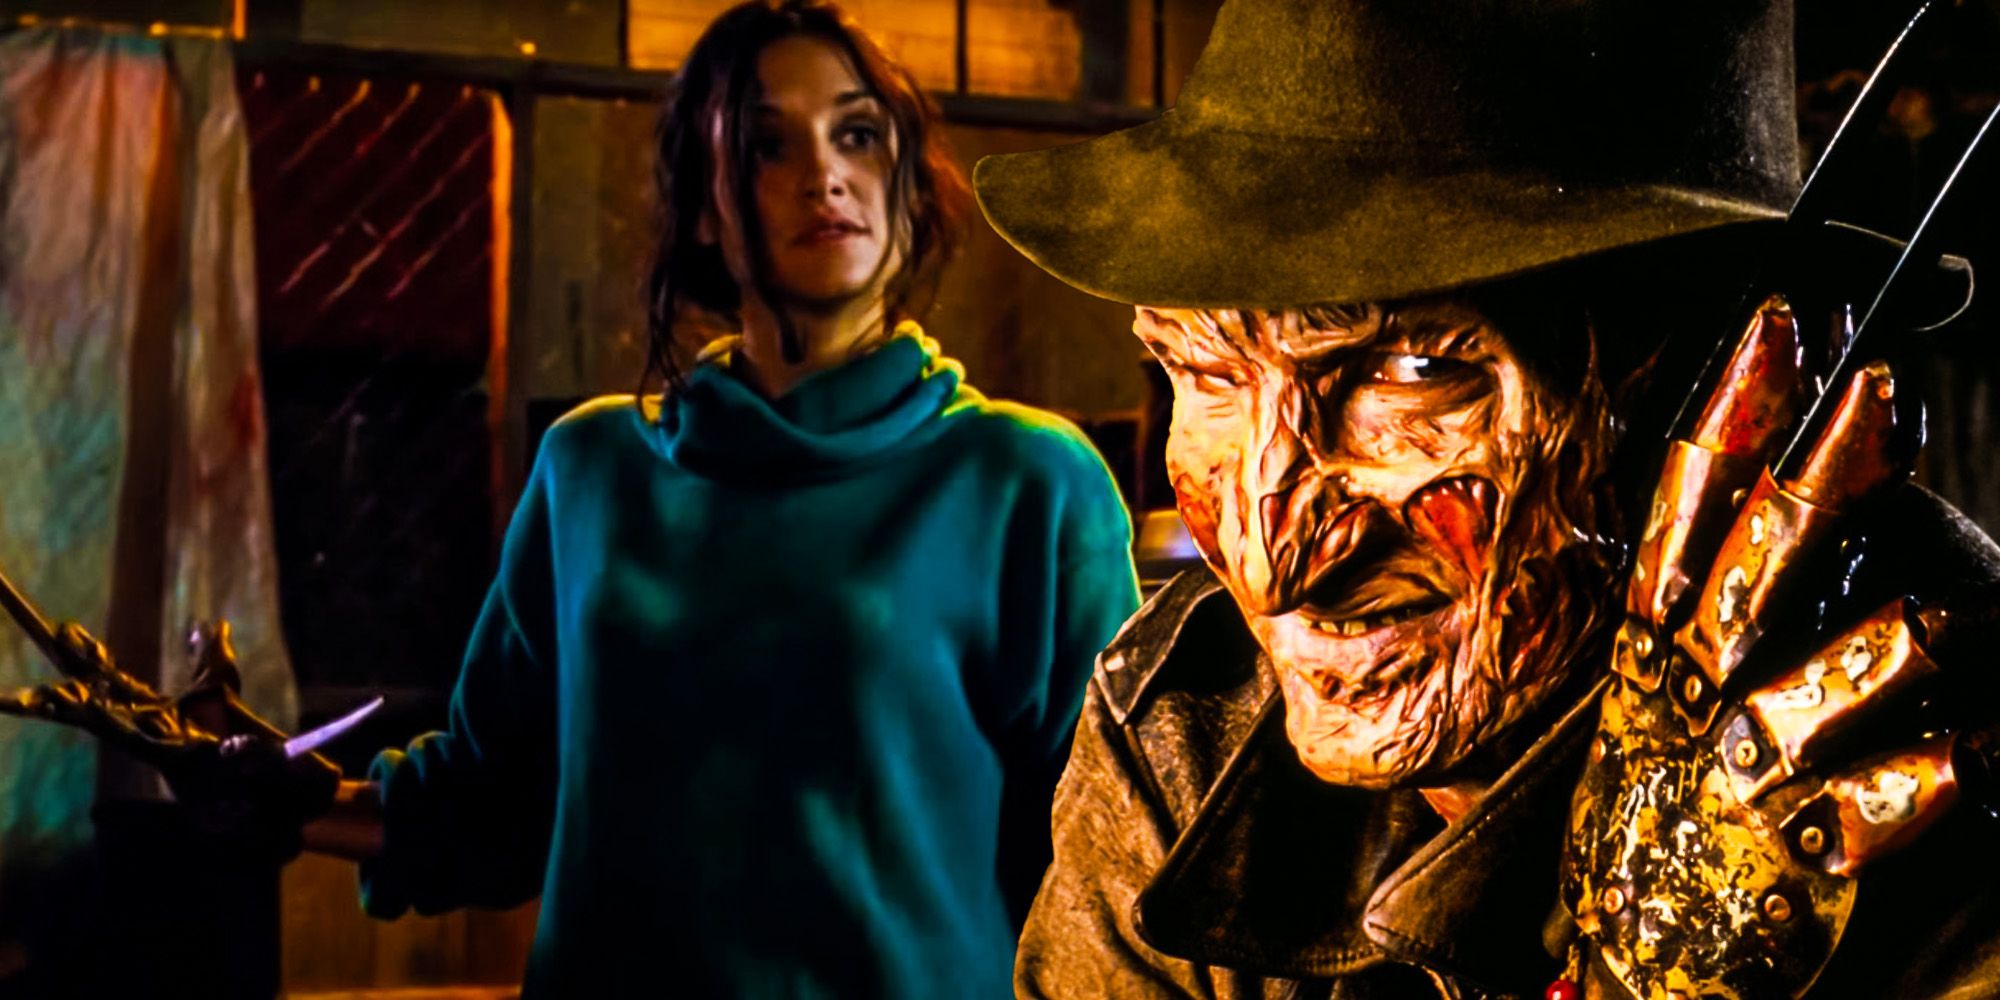 Katherine only character beside Freddy to wear the glove nightmare on elm street